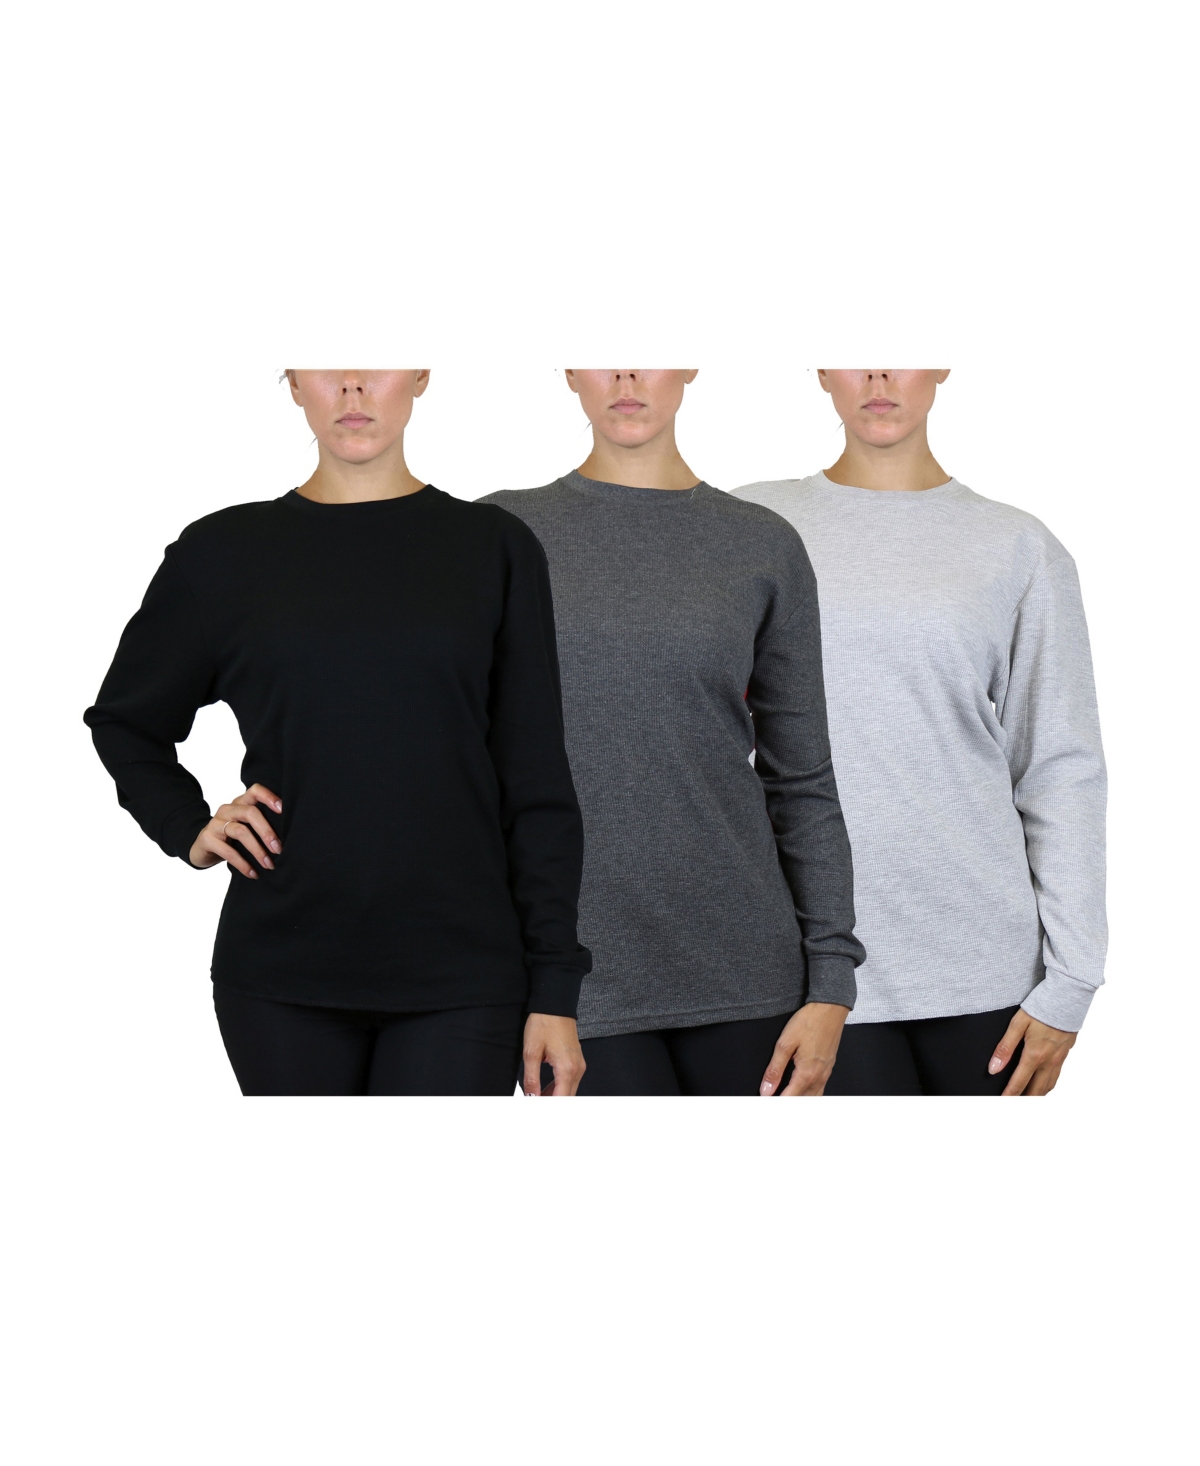 Shop Galaxy By Harvic Women's Loose Fit Waffle Knit Thermal Shirt, Pack Of 3 In Black,charocal,heather Gray